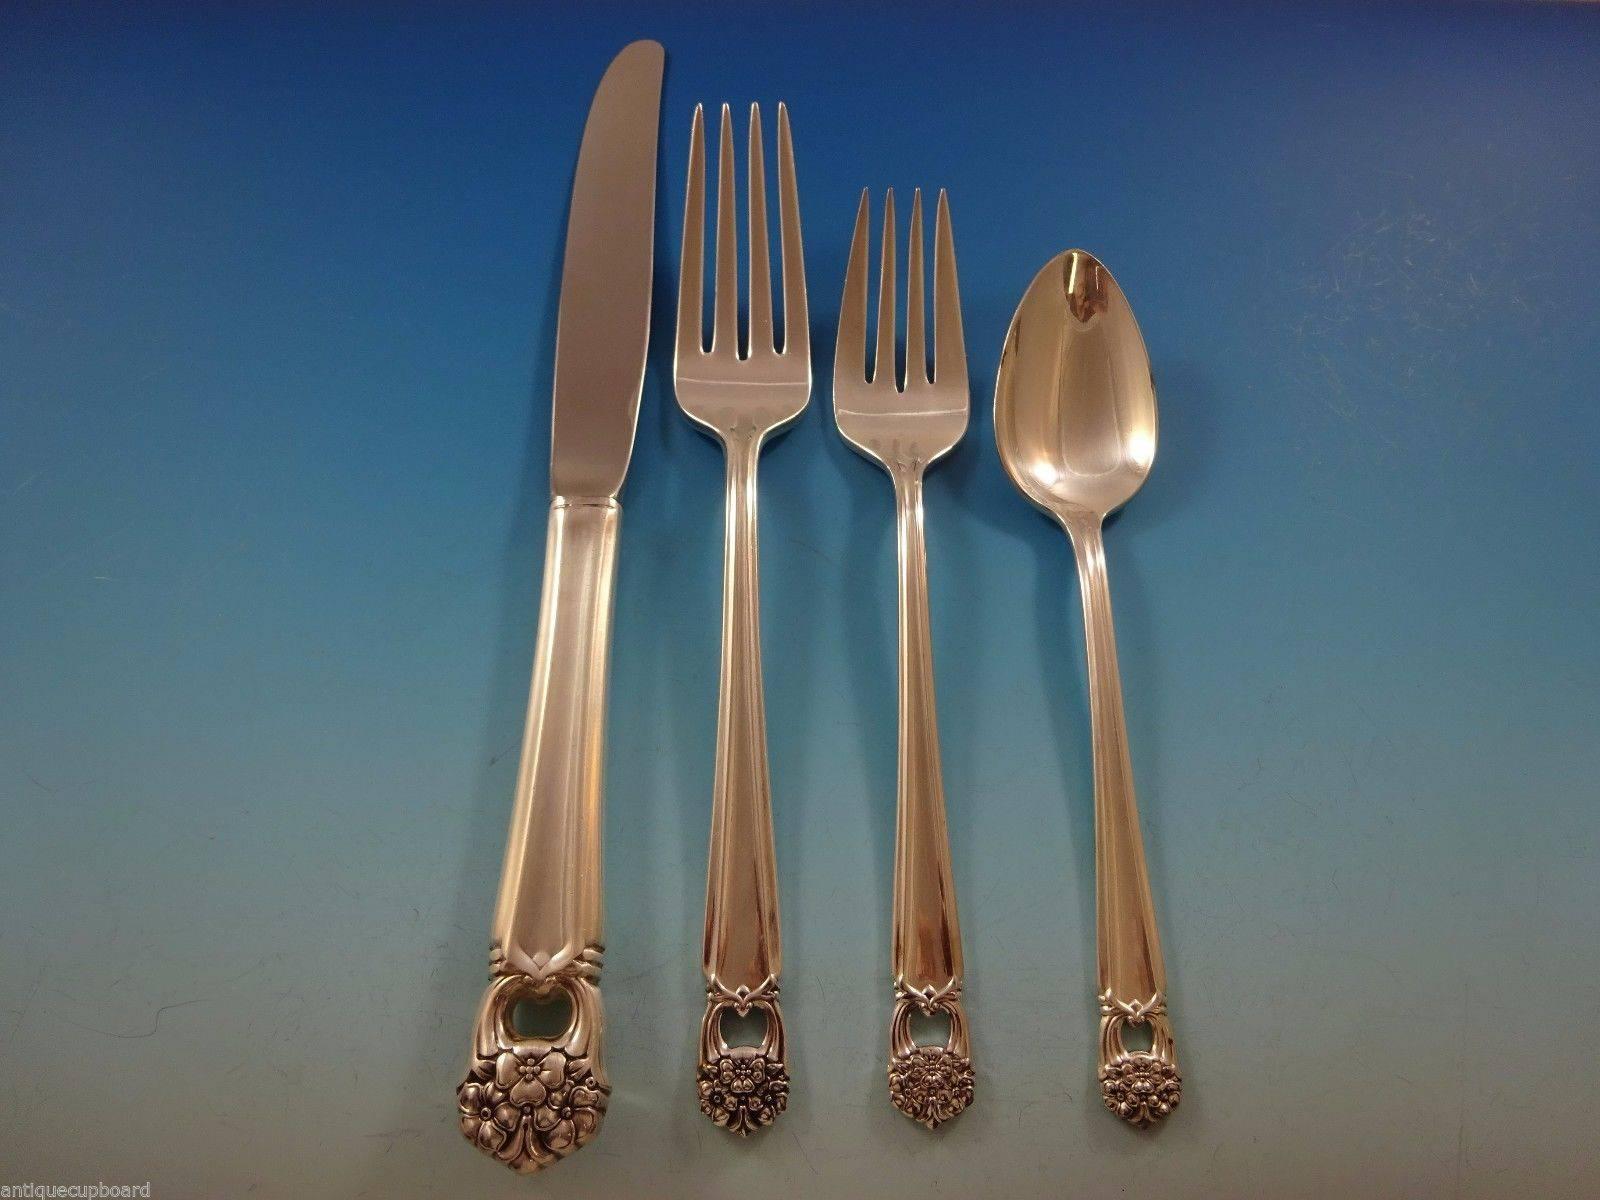 1847 rogers bros is eternally yours silverware value